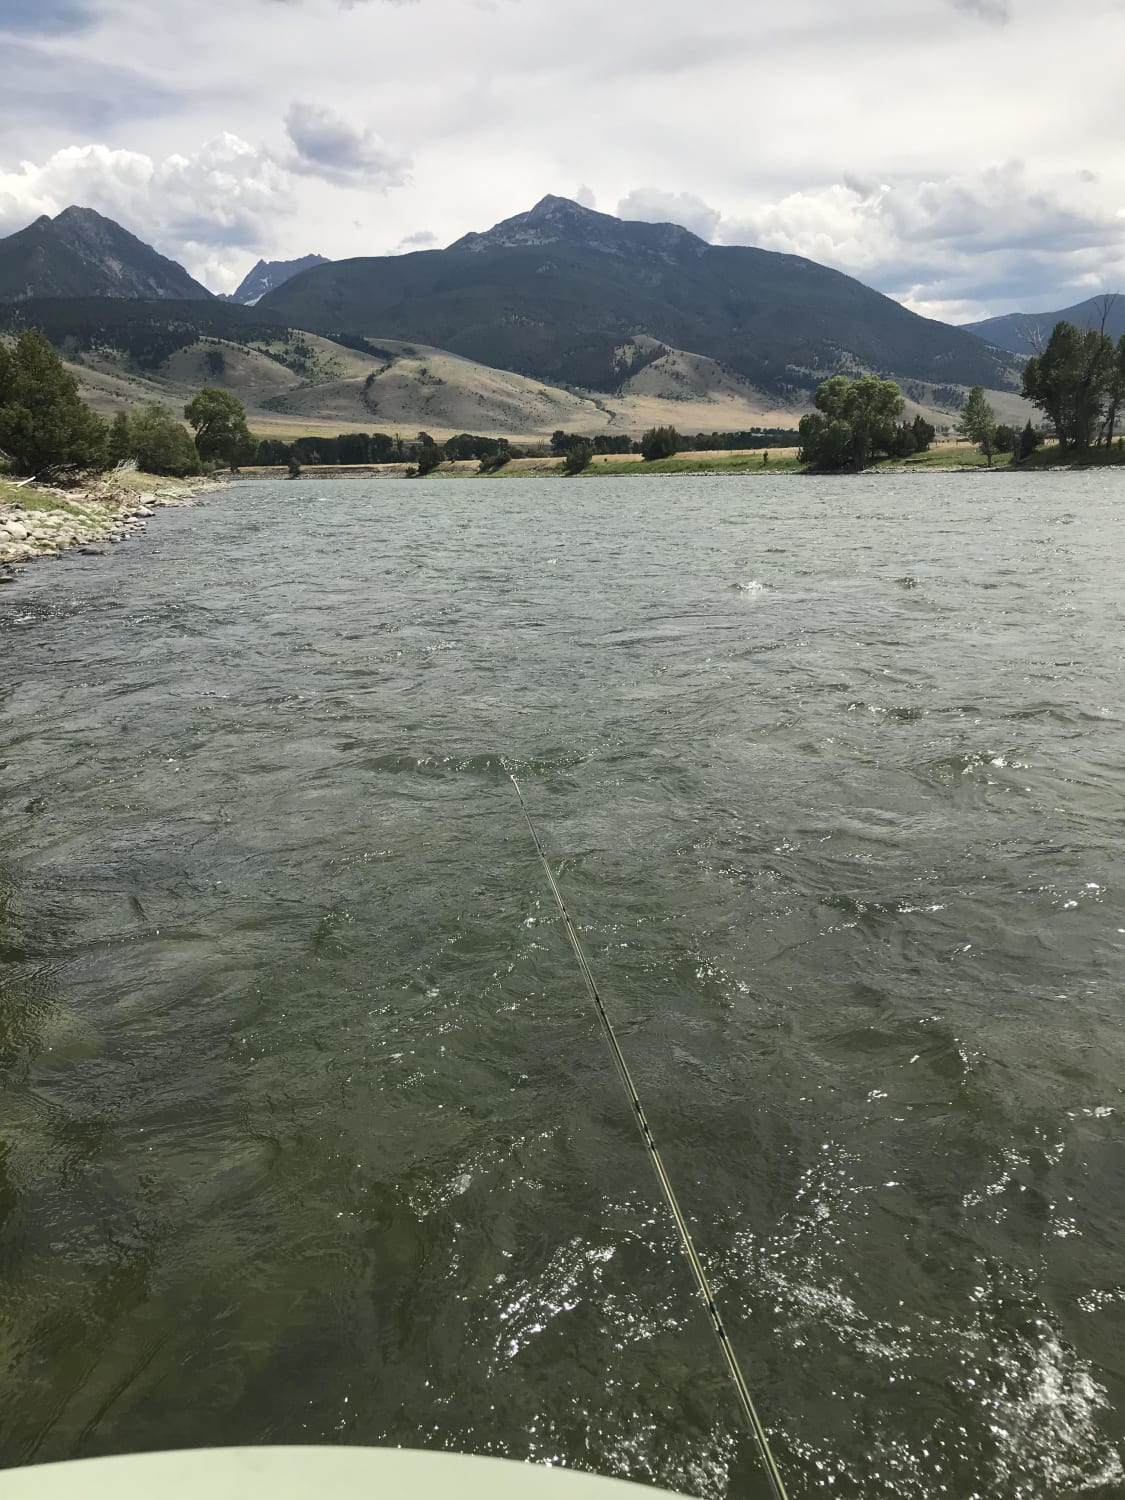 Took this pic while fishing on the yellow stone river in Montana